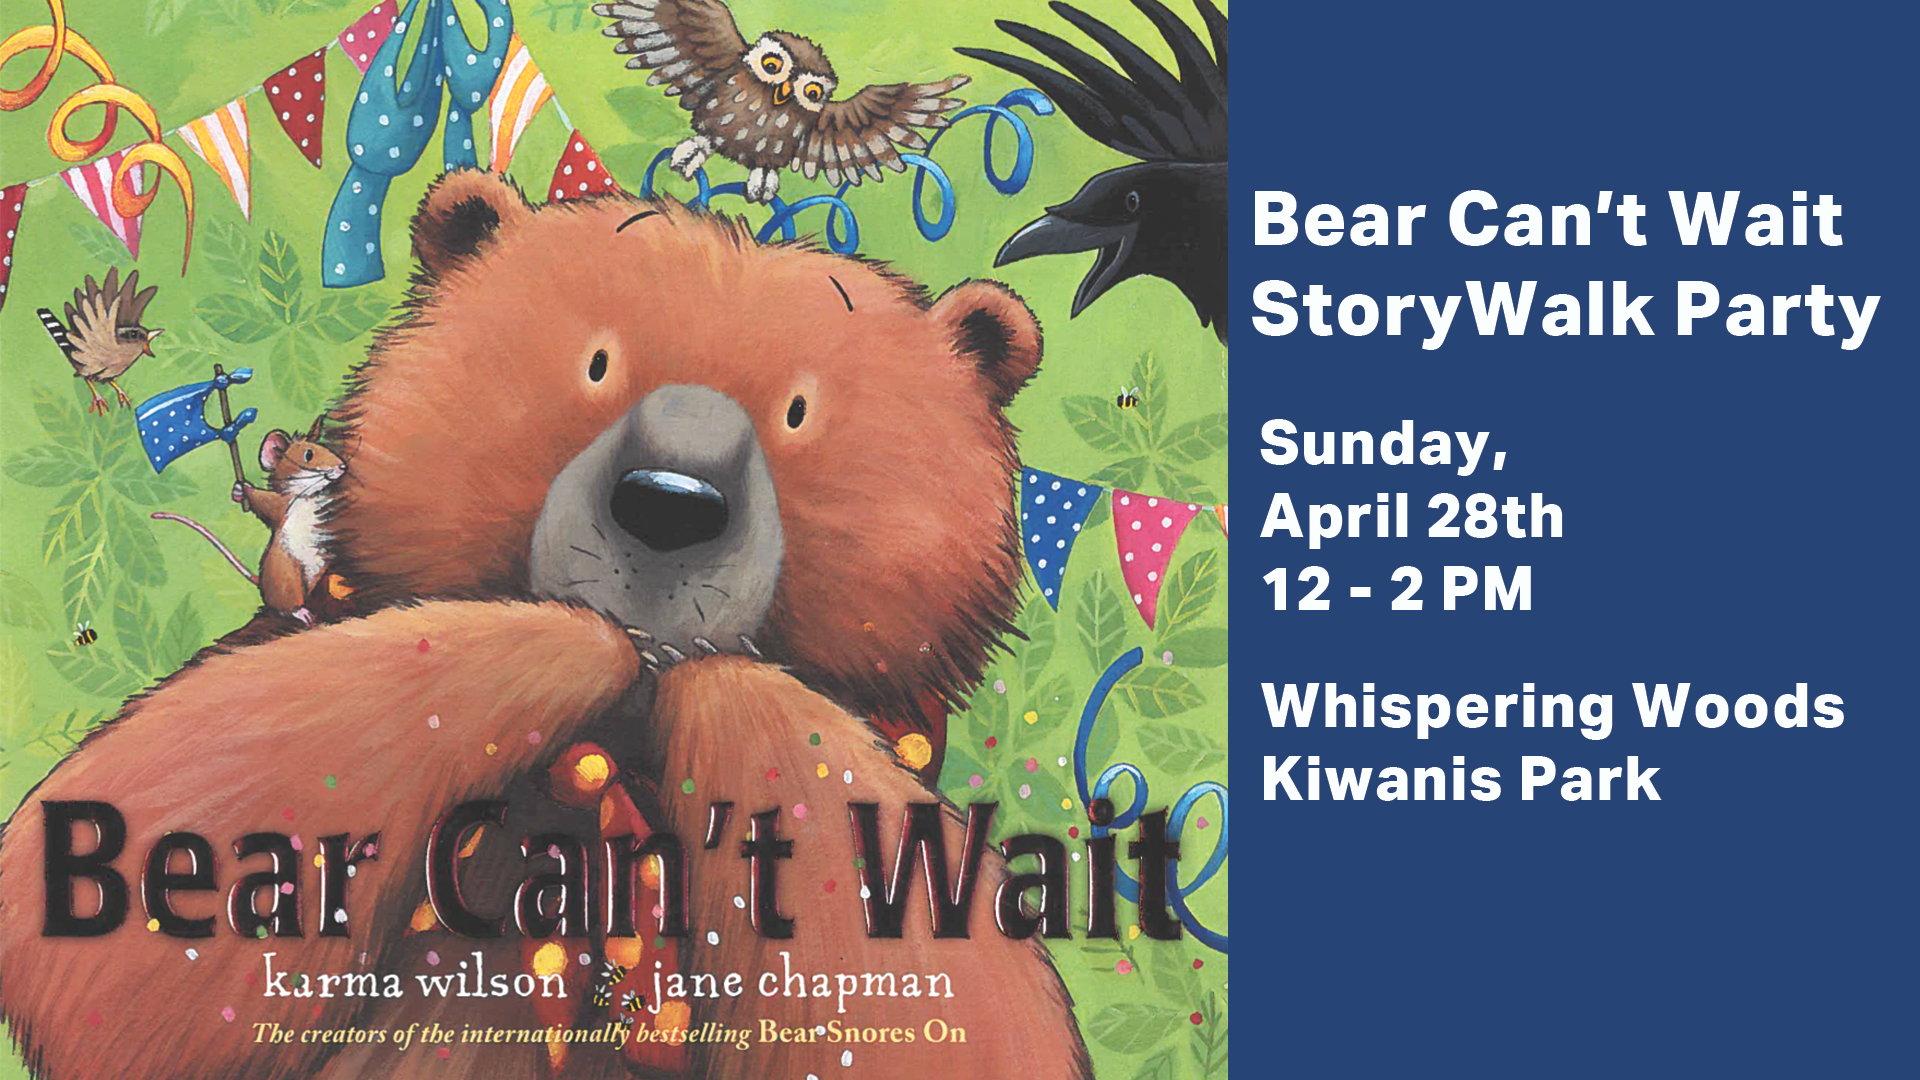 Bear Can't Wait StoryWalk Party on Sunday, April 28th from 12-2pm at Whispering Woods Kiwanis Park